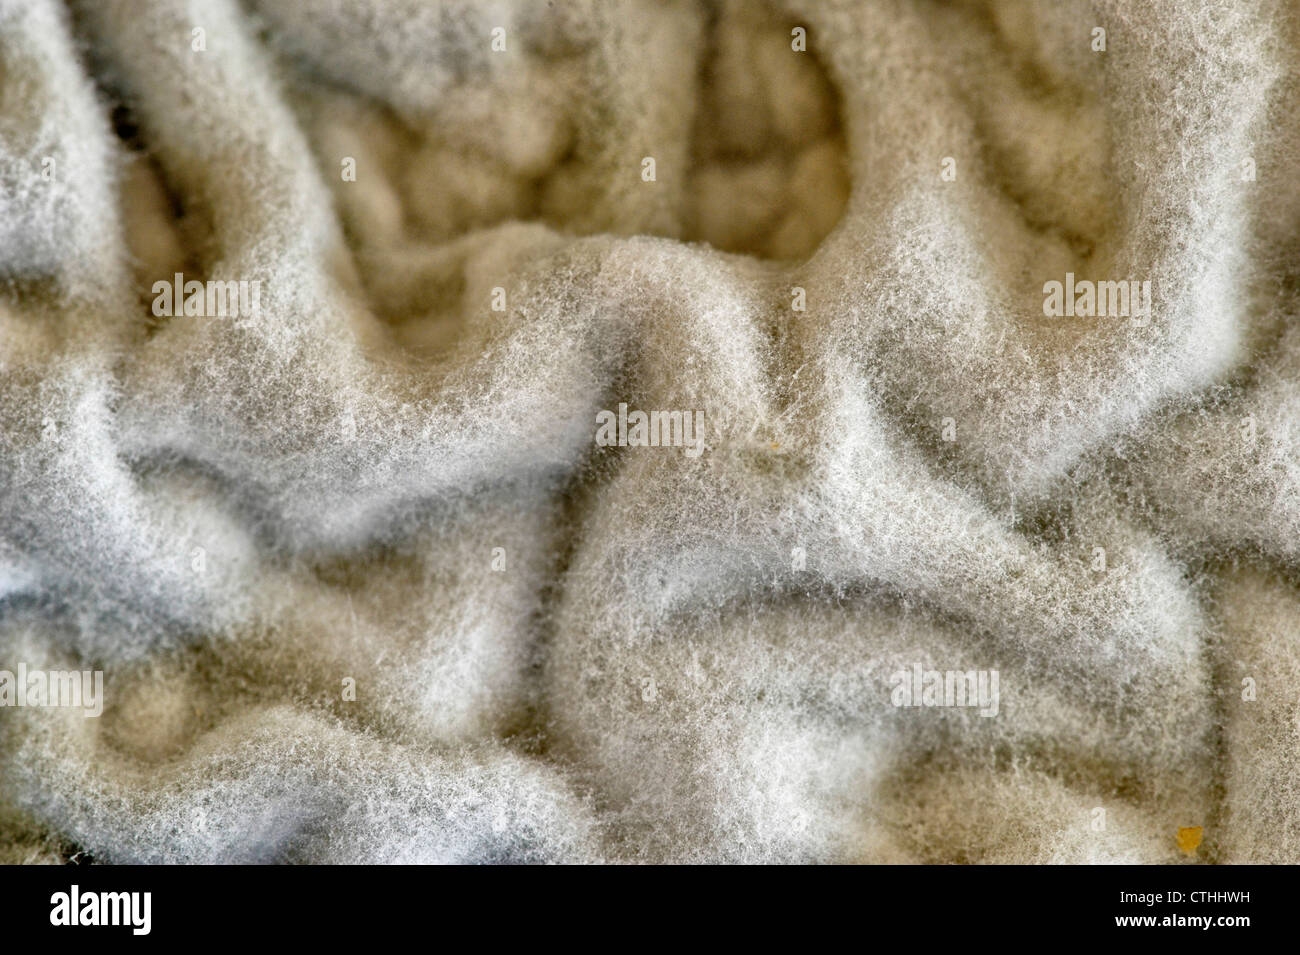 Mould mycelium on the surface of a spoiled container of sour cream, Greater Sudbury, Ontario, Canada Stock Photo